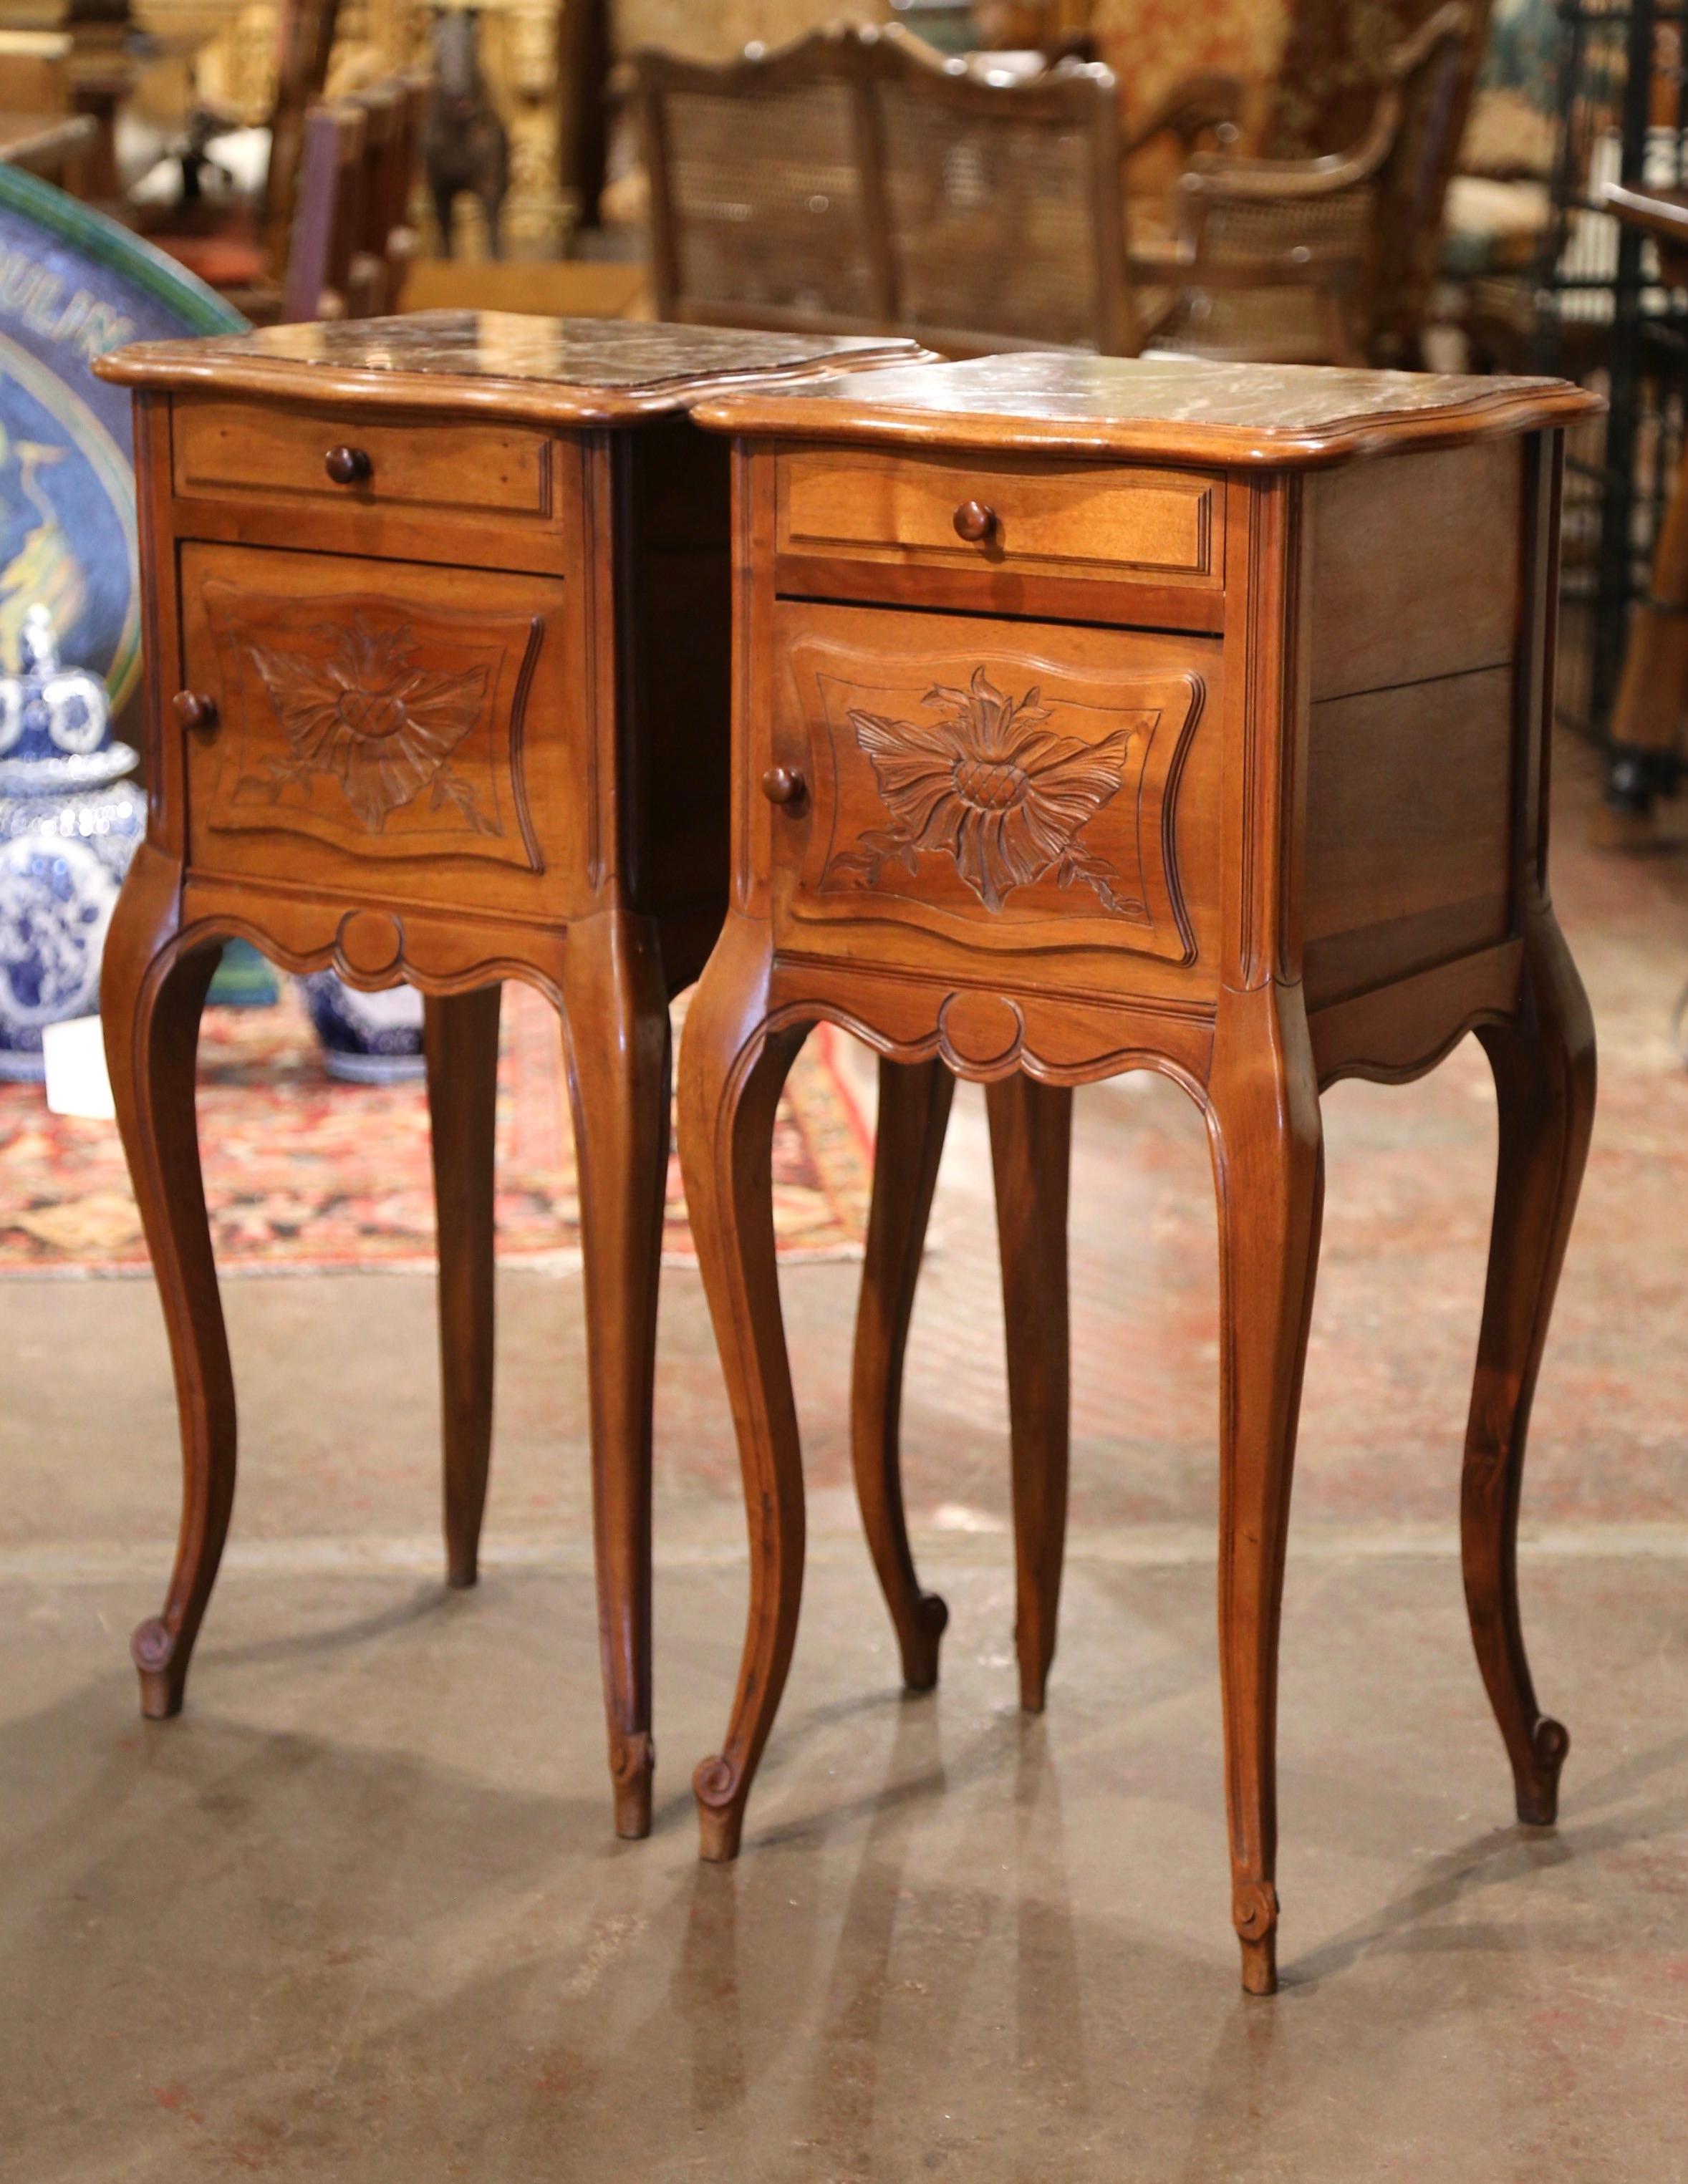 These elegant antique bedside tables were created in France, circa 1920. Almost square in shape, the fruitwood chests stand on cabriole legs ending with escargot feet over a scalloped apron. Each cabinet is fitted with a top drawer dressed with a